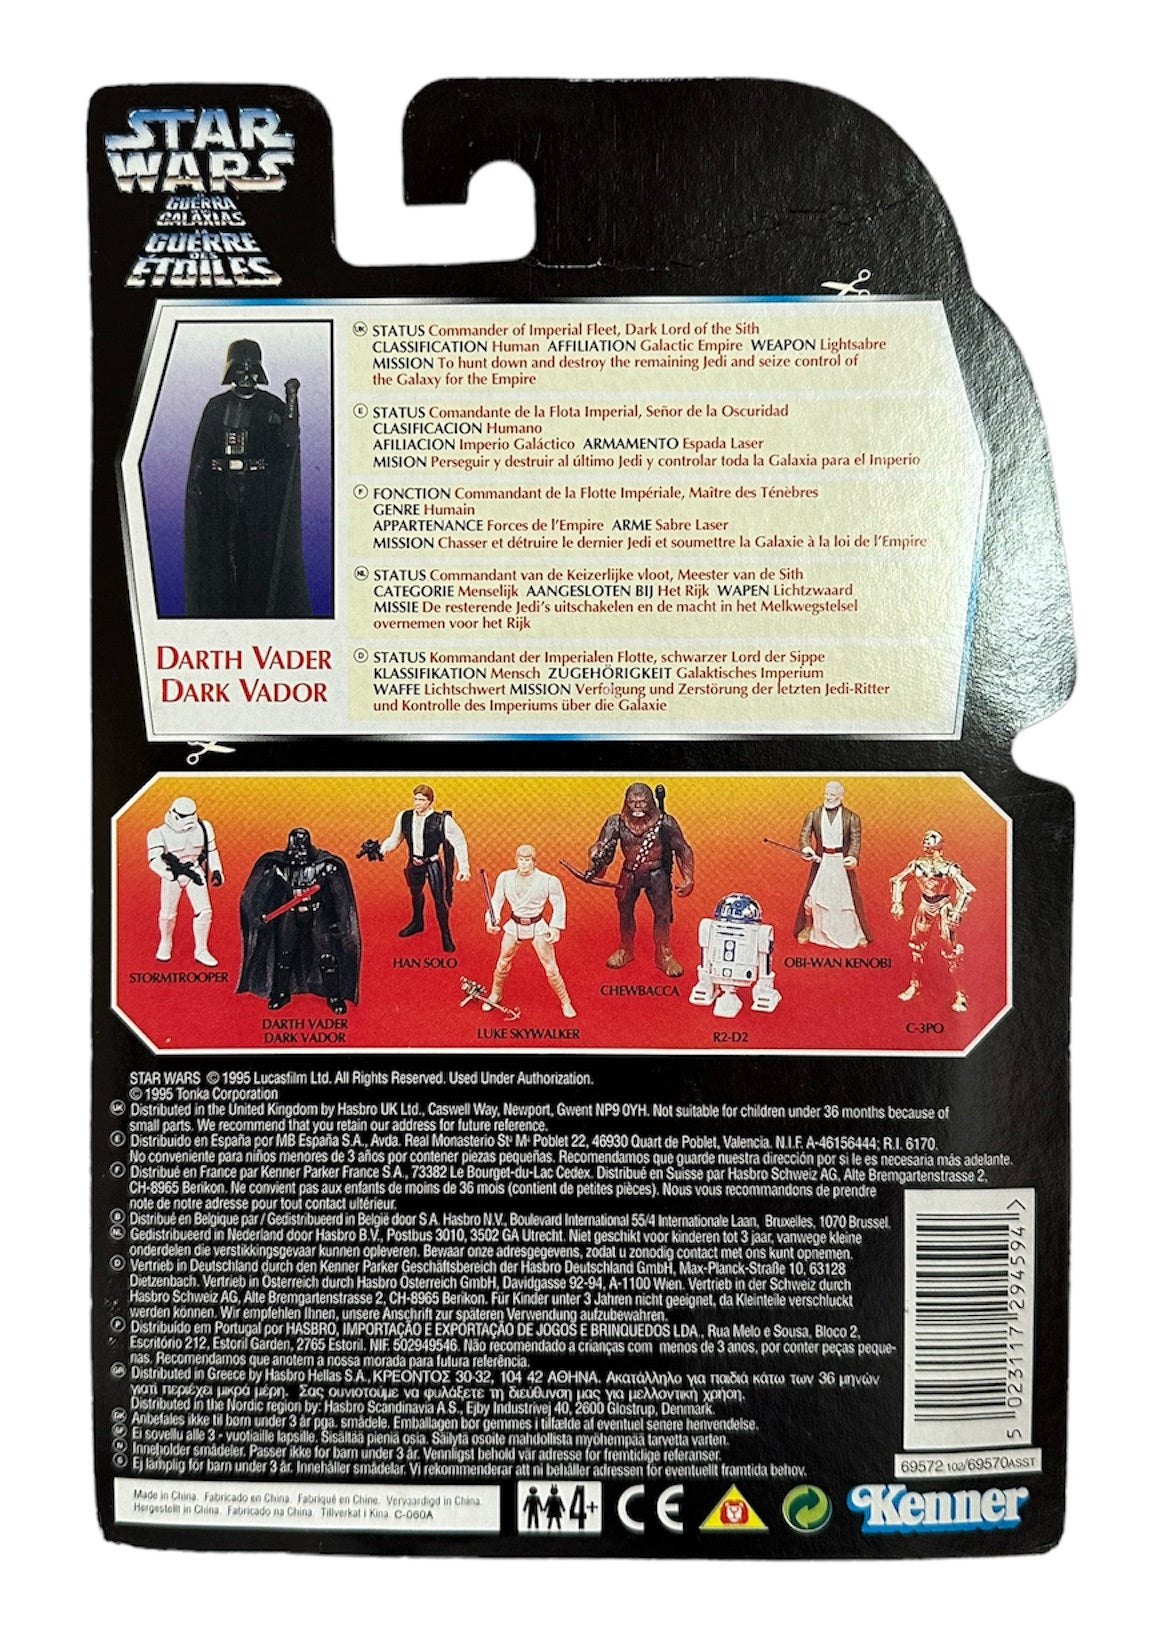 Vintage 1995 Star Wars The Power Of The Force Red Card Darth Vader / Dark Vador Action Figure - Brand New Factory Sealed Shop Stock Room Find